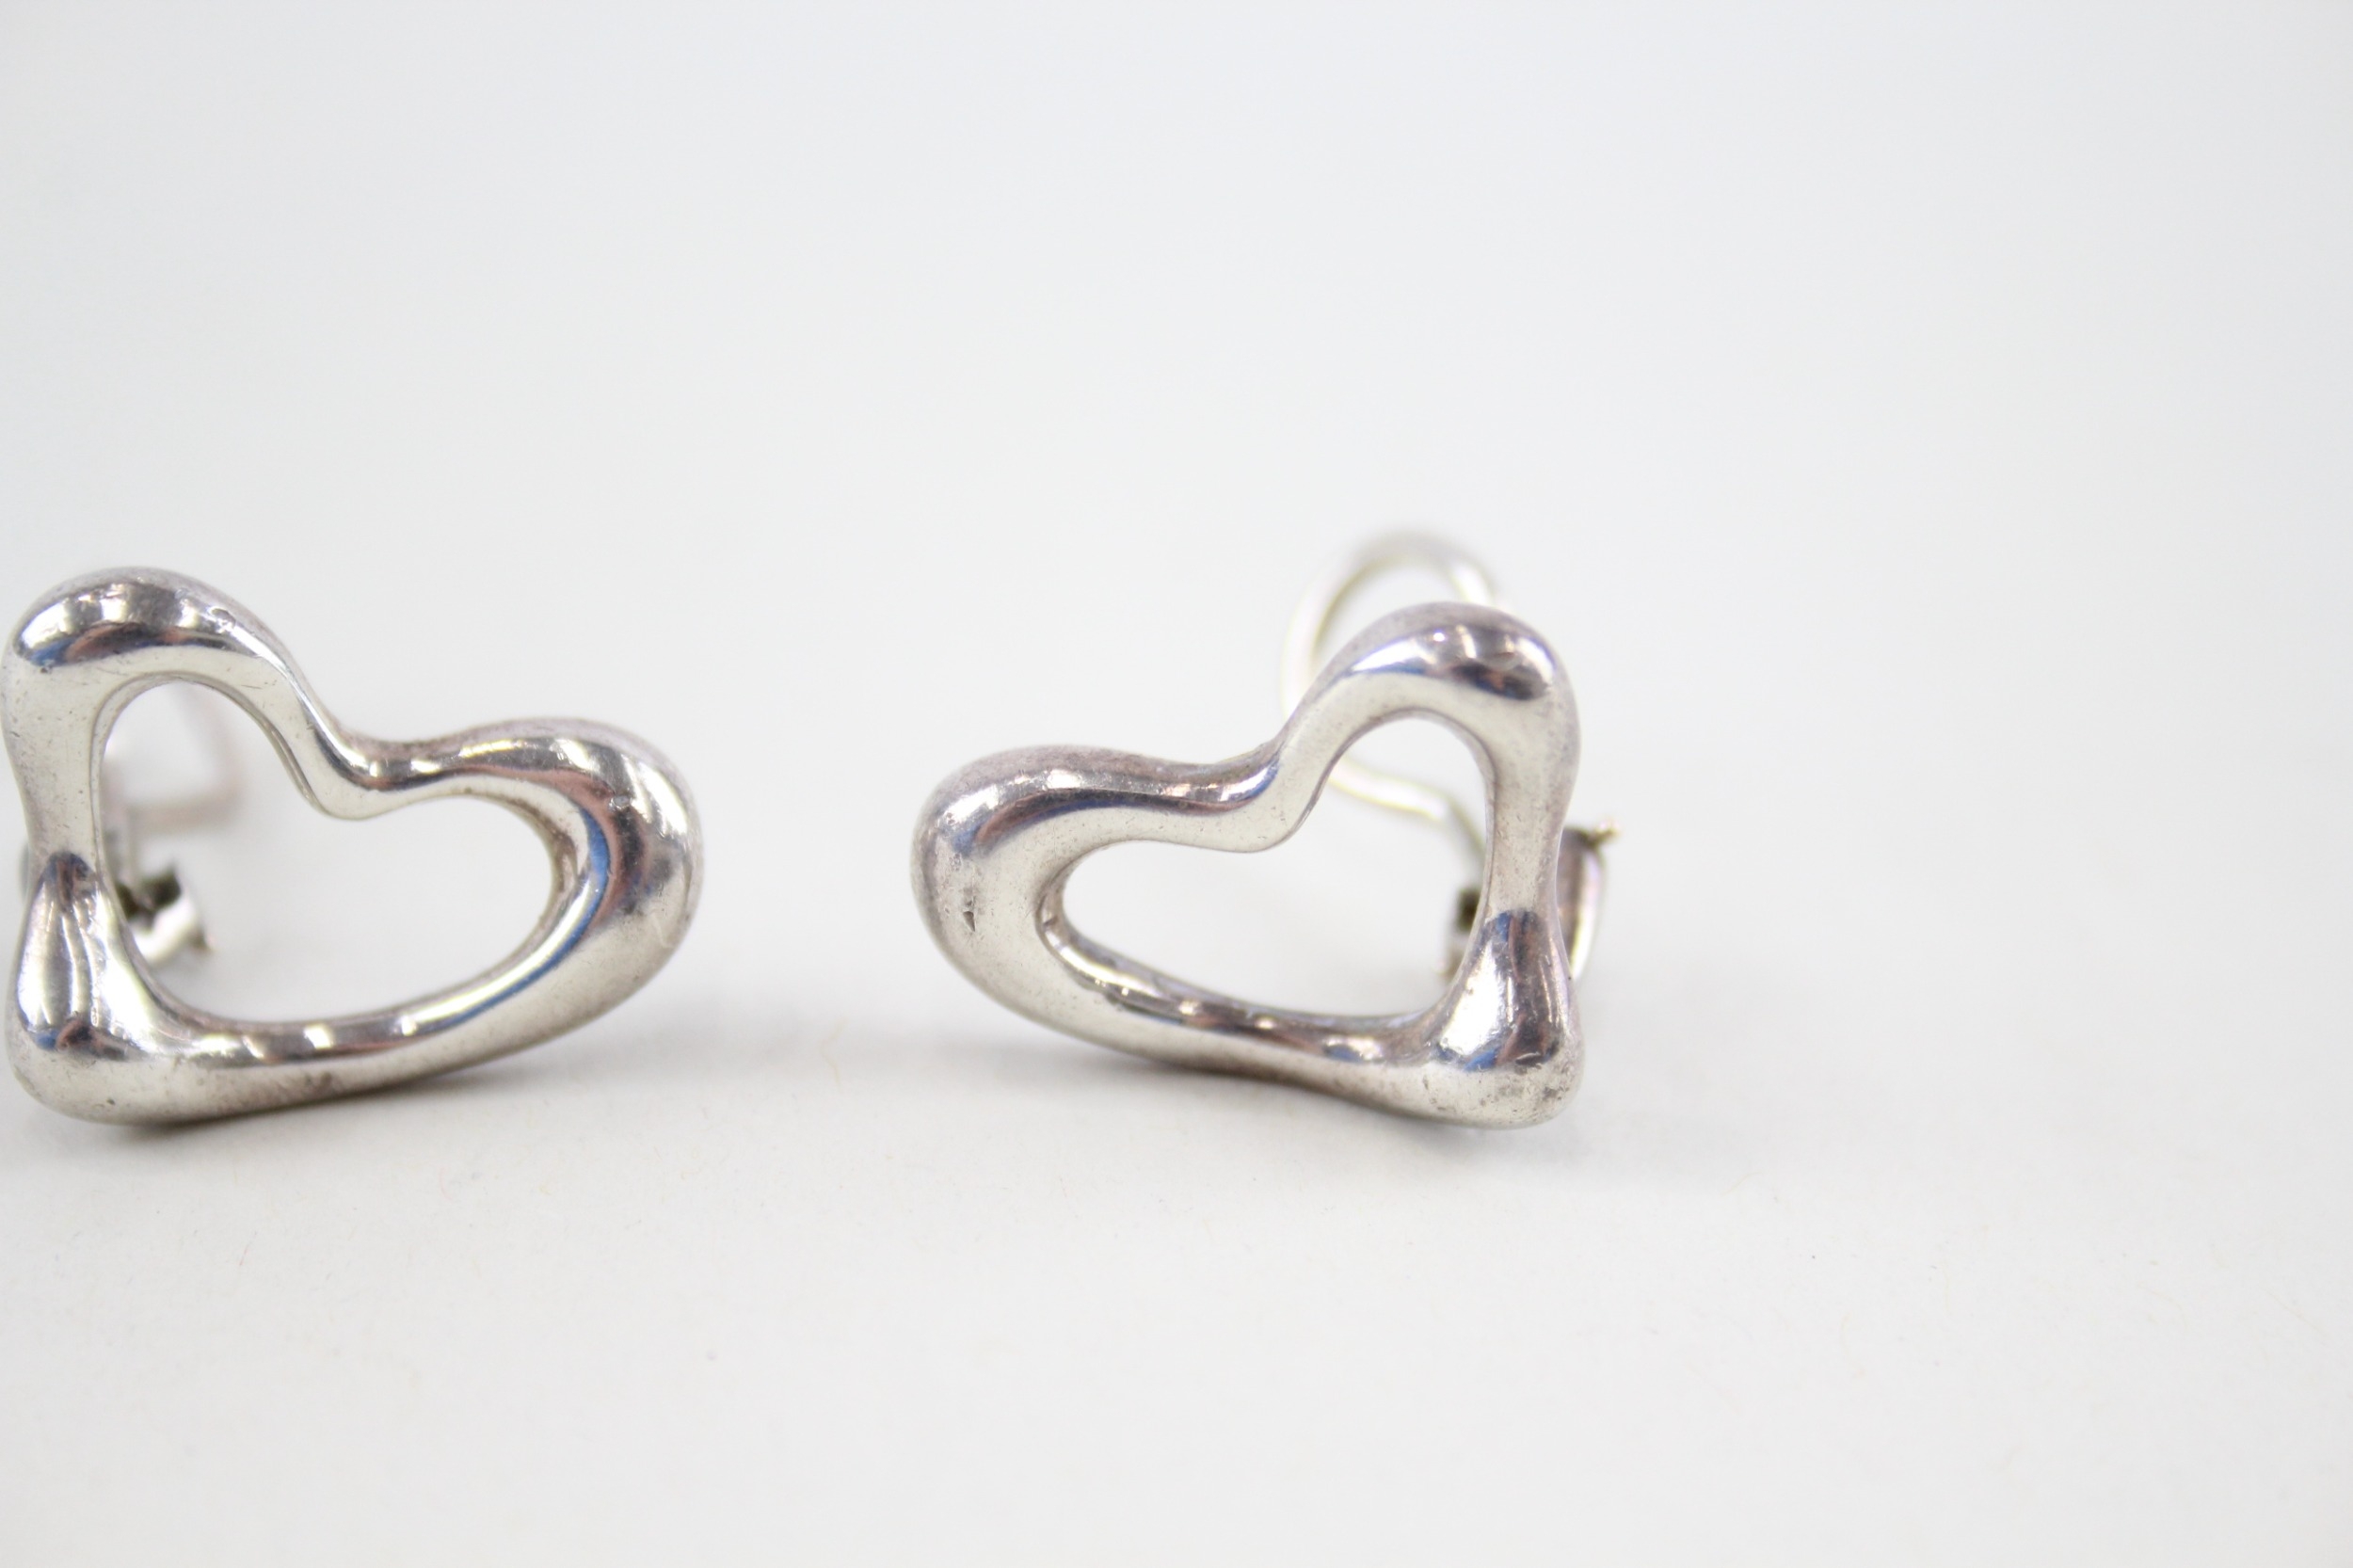 Pair of silver heart clip on earrings by designer Tiffany & Co (9g) - Image 3 of 4